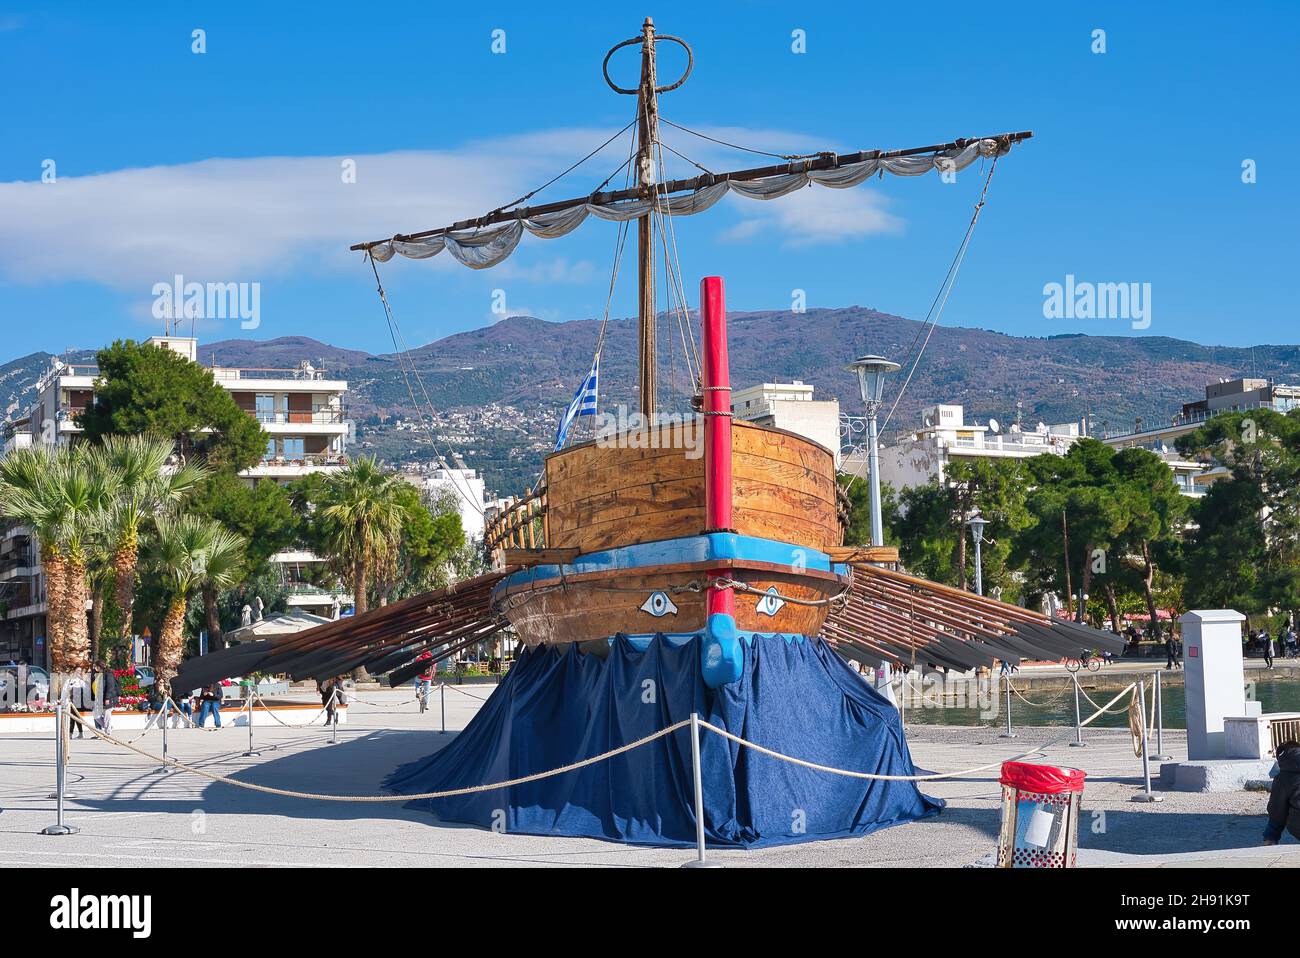 University building and the mythical ship Argo in the port of Volos, two emblems of the city of Volos. Hellas 11-28-2021 Stock Photo